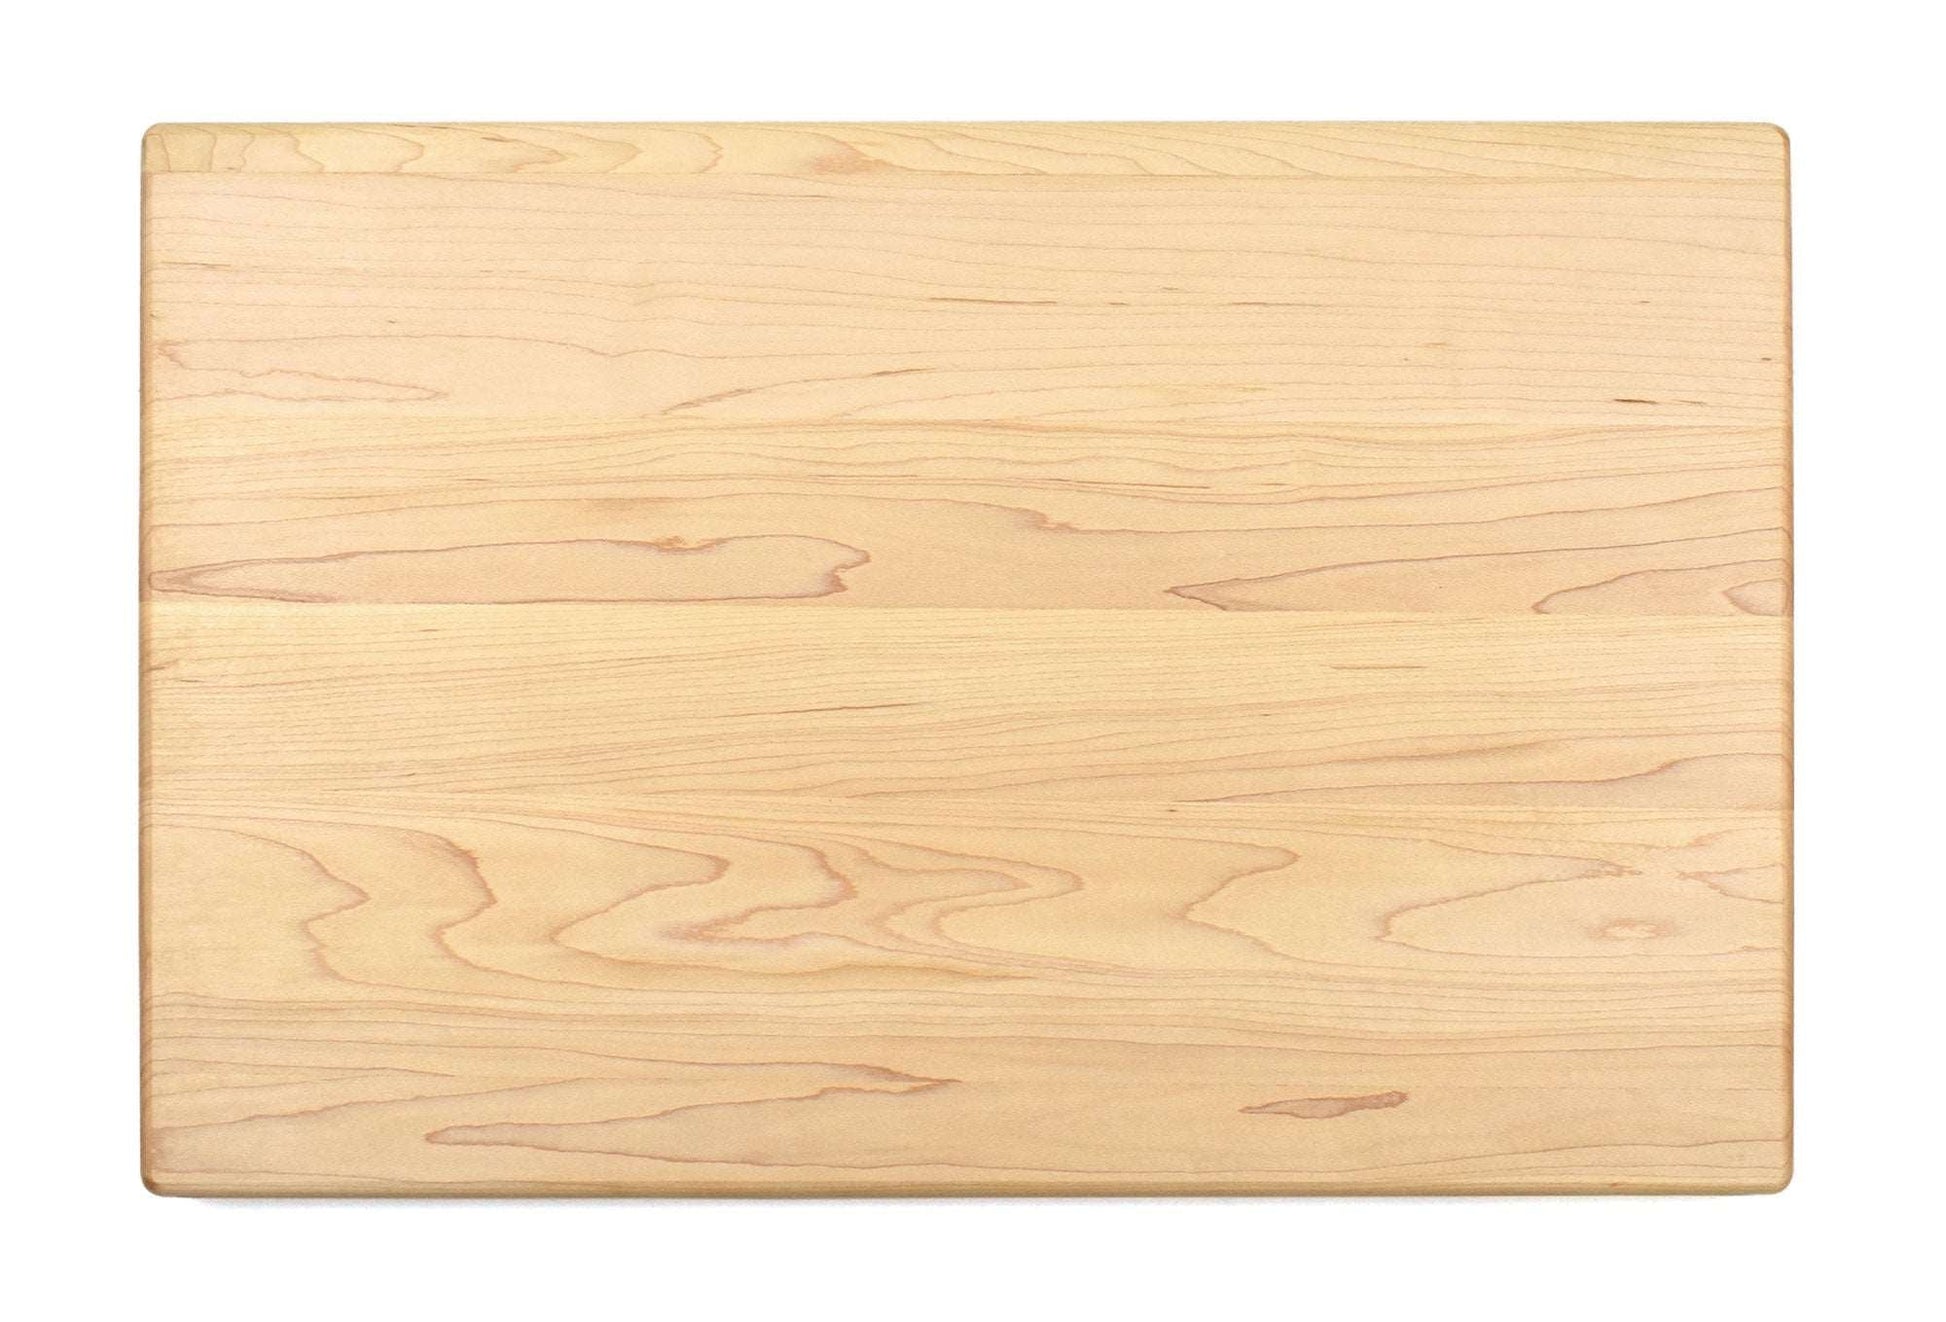 There's Always Something Cutting Board - Premium Cutting Boards from Hipster Lasers - Just $40! Shop now at Hipster Lasers